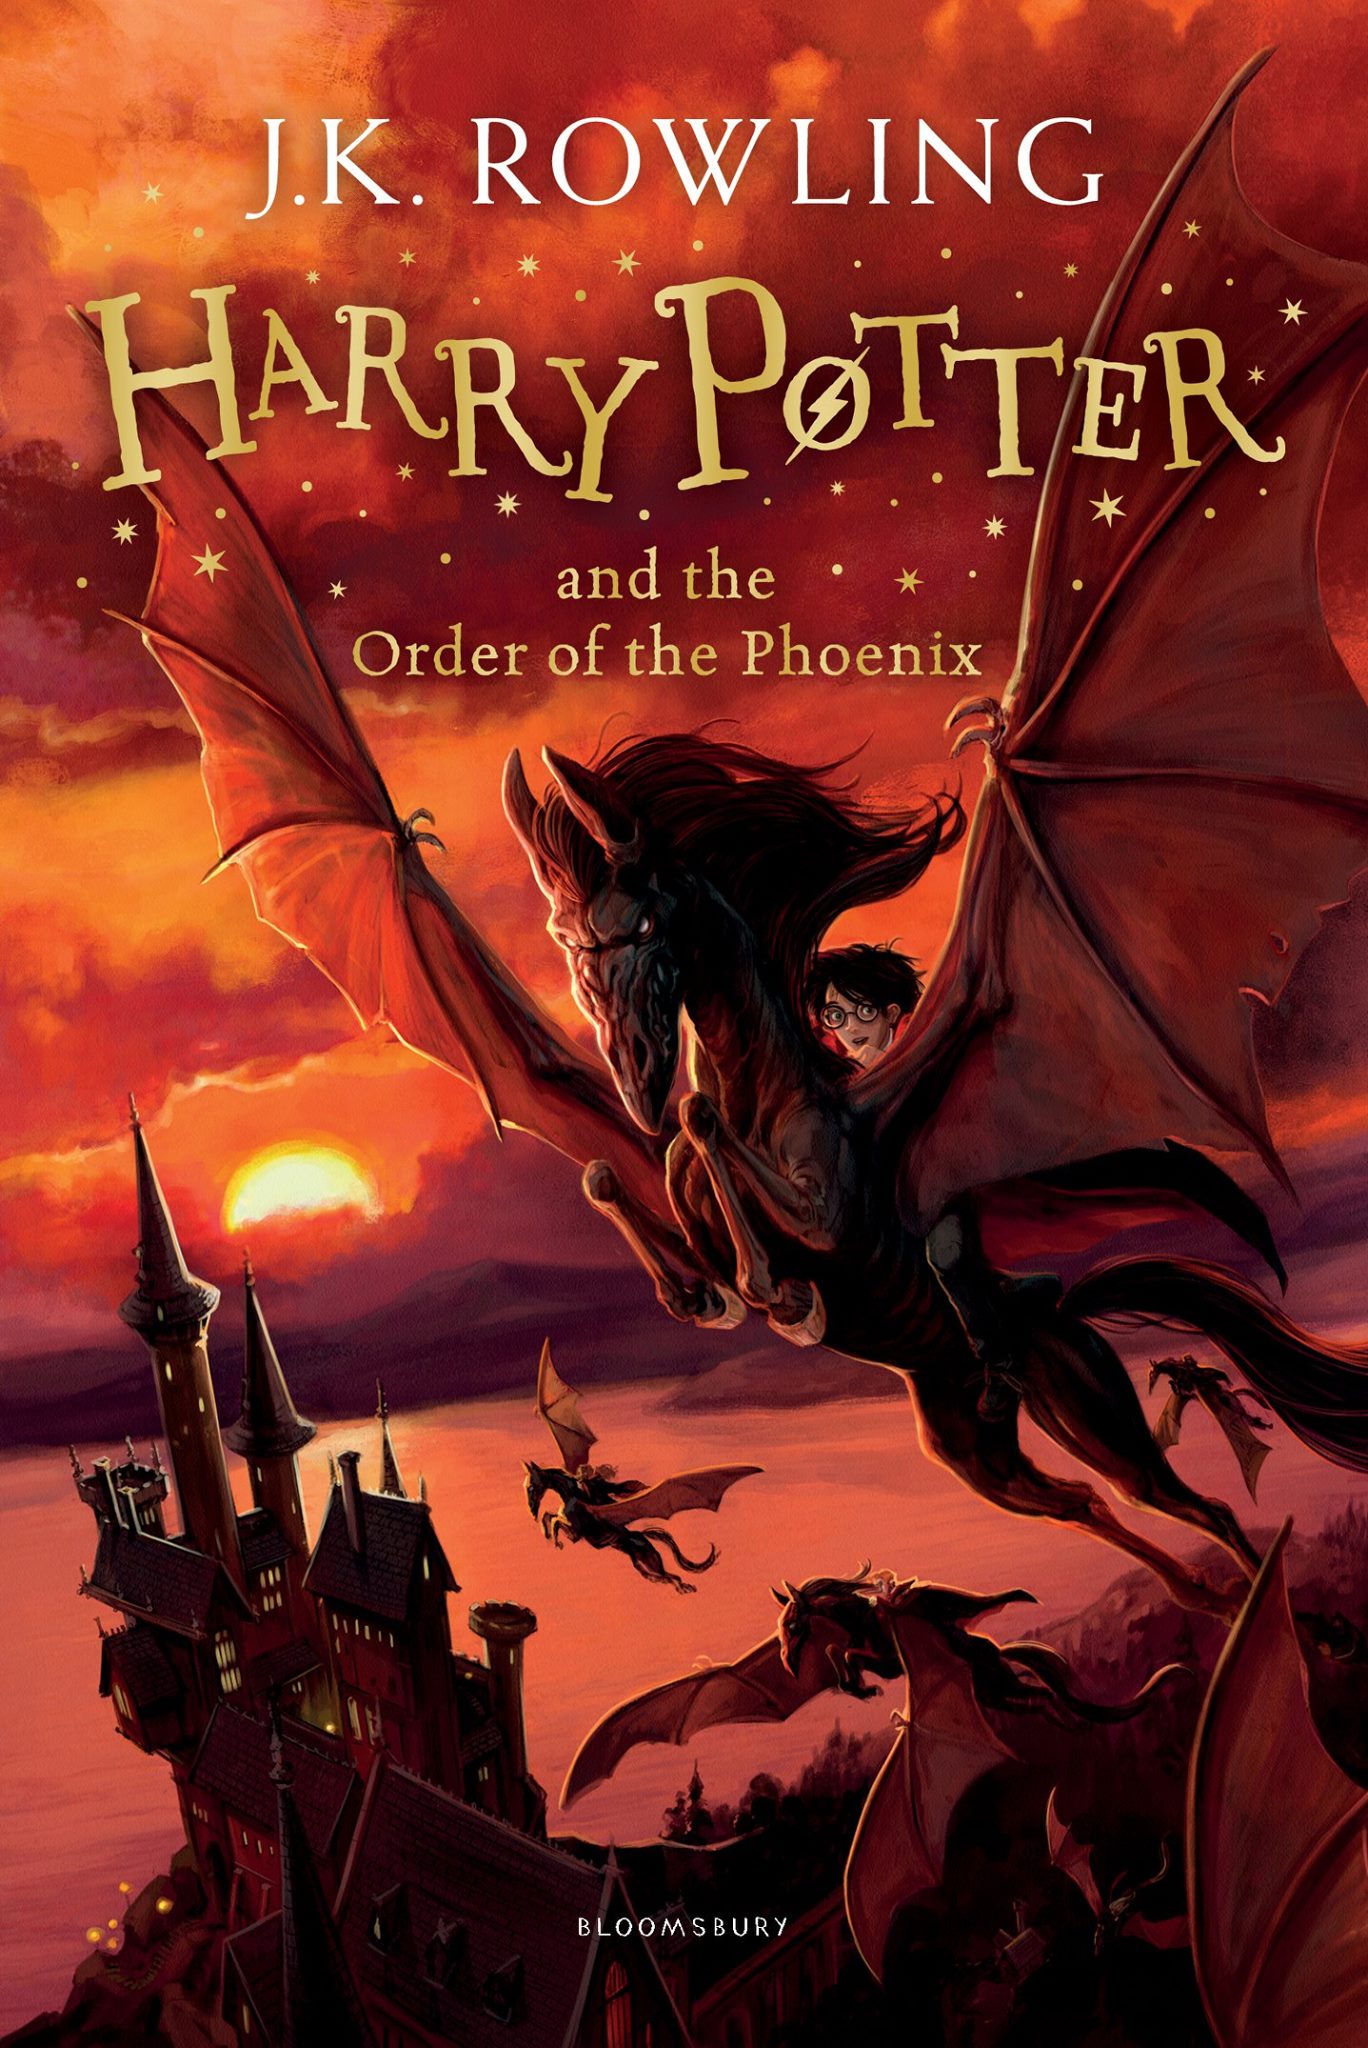 harry potter order of the phoenix ar test answers